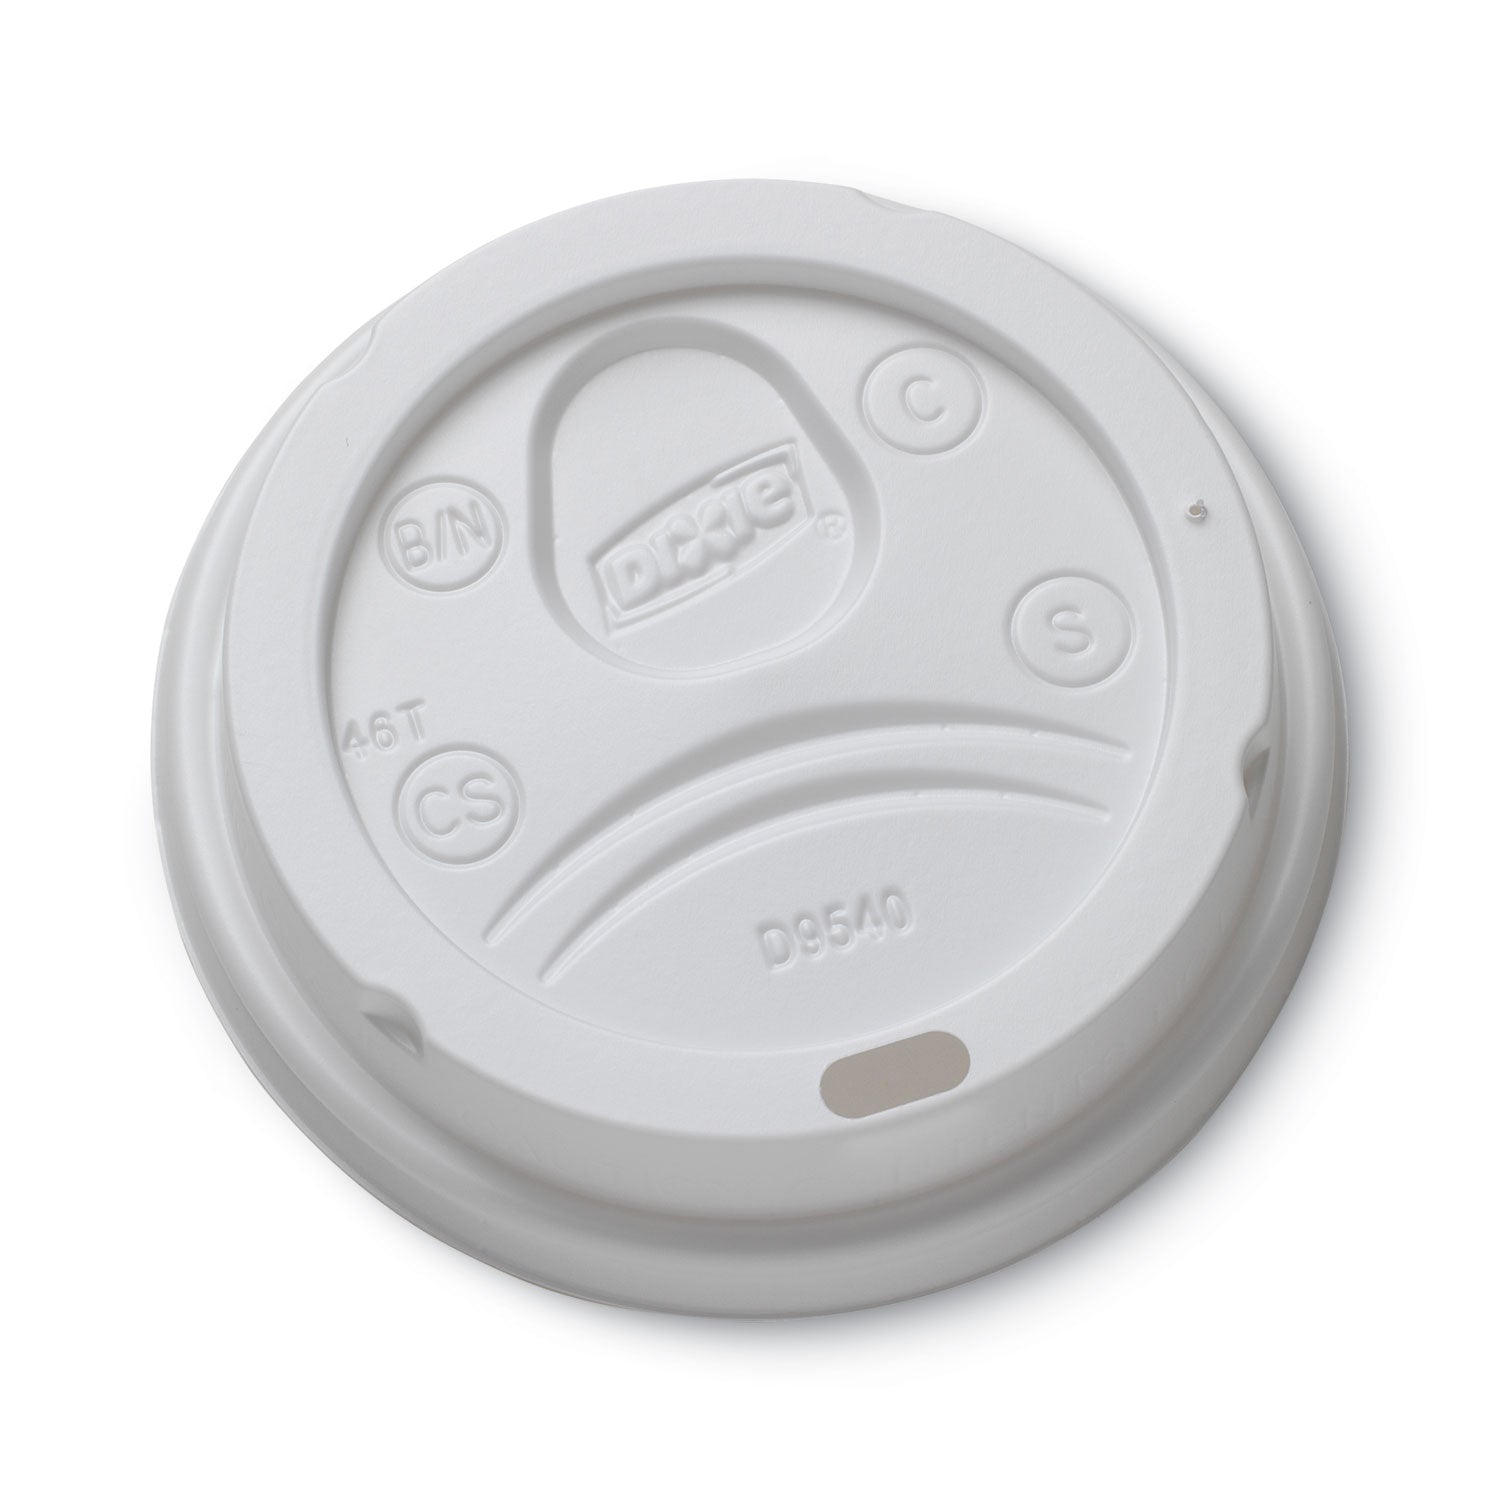 Sip-Through Dome Hot Drink Lids, Fits 10 oz Cups, White, 100/Pack - 